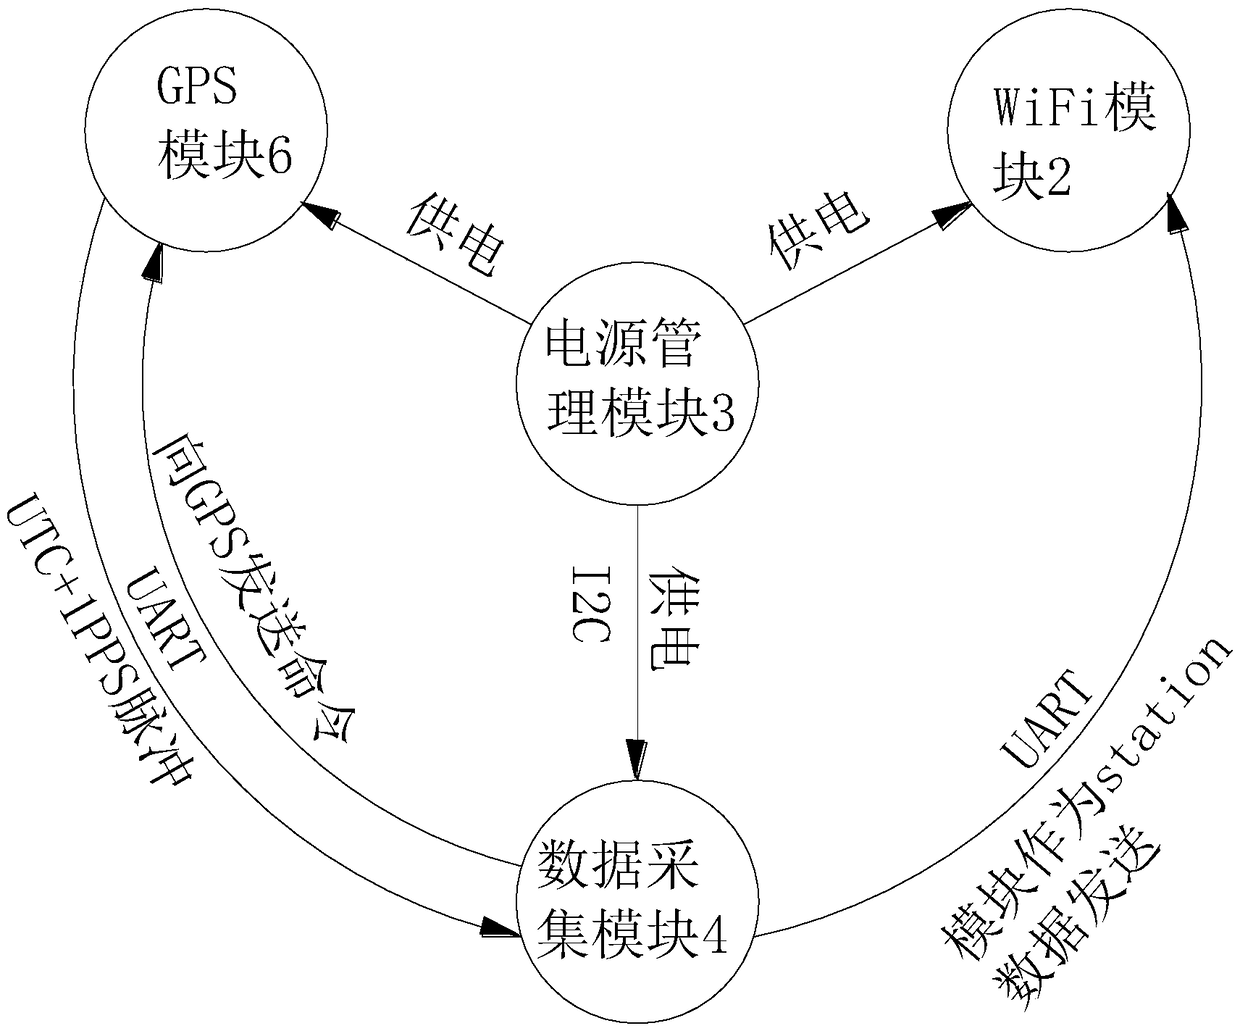 Data acquisition method for signal synchronization acquisition system based on WiFi wireless and GPS time service